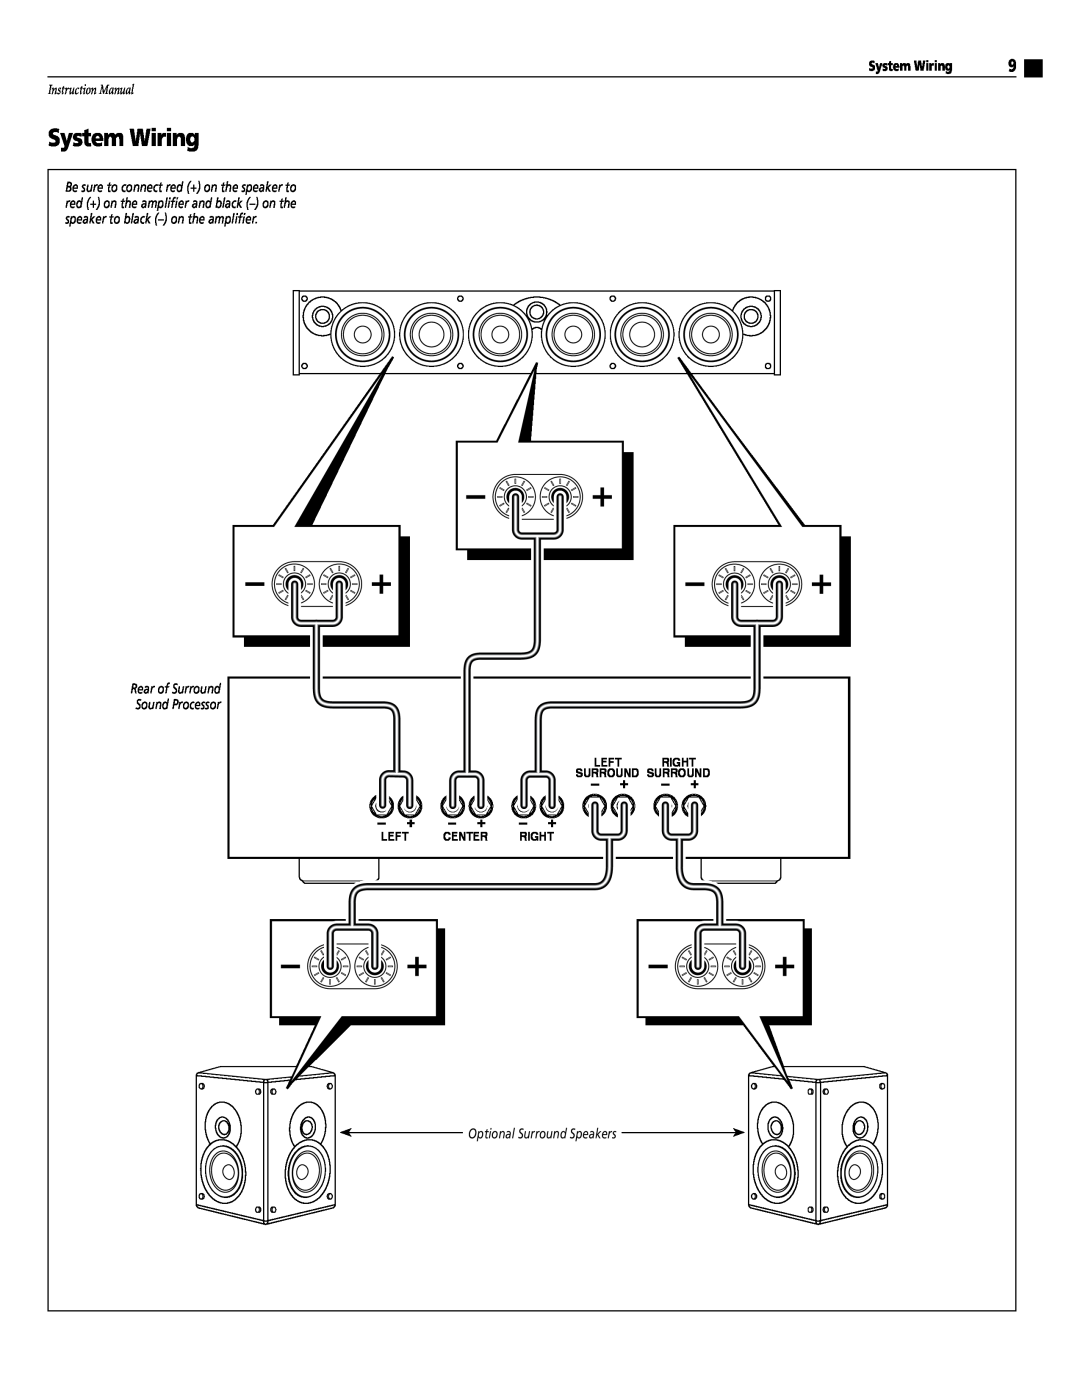 Atlantic Technology FS-5000, FS-4000 instruction manual System Wiring, Left Right Surround Surround Left Center Right 